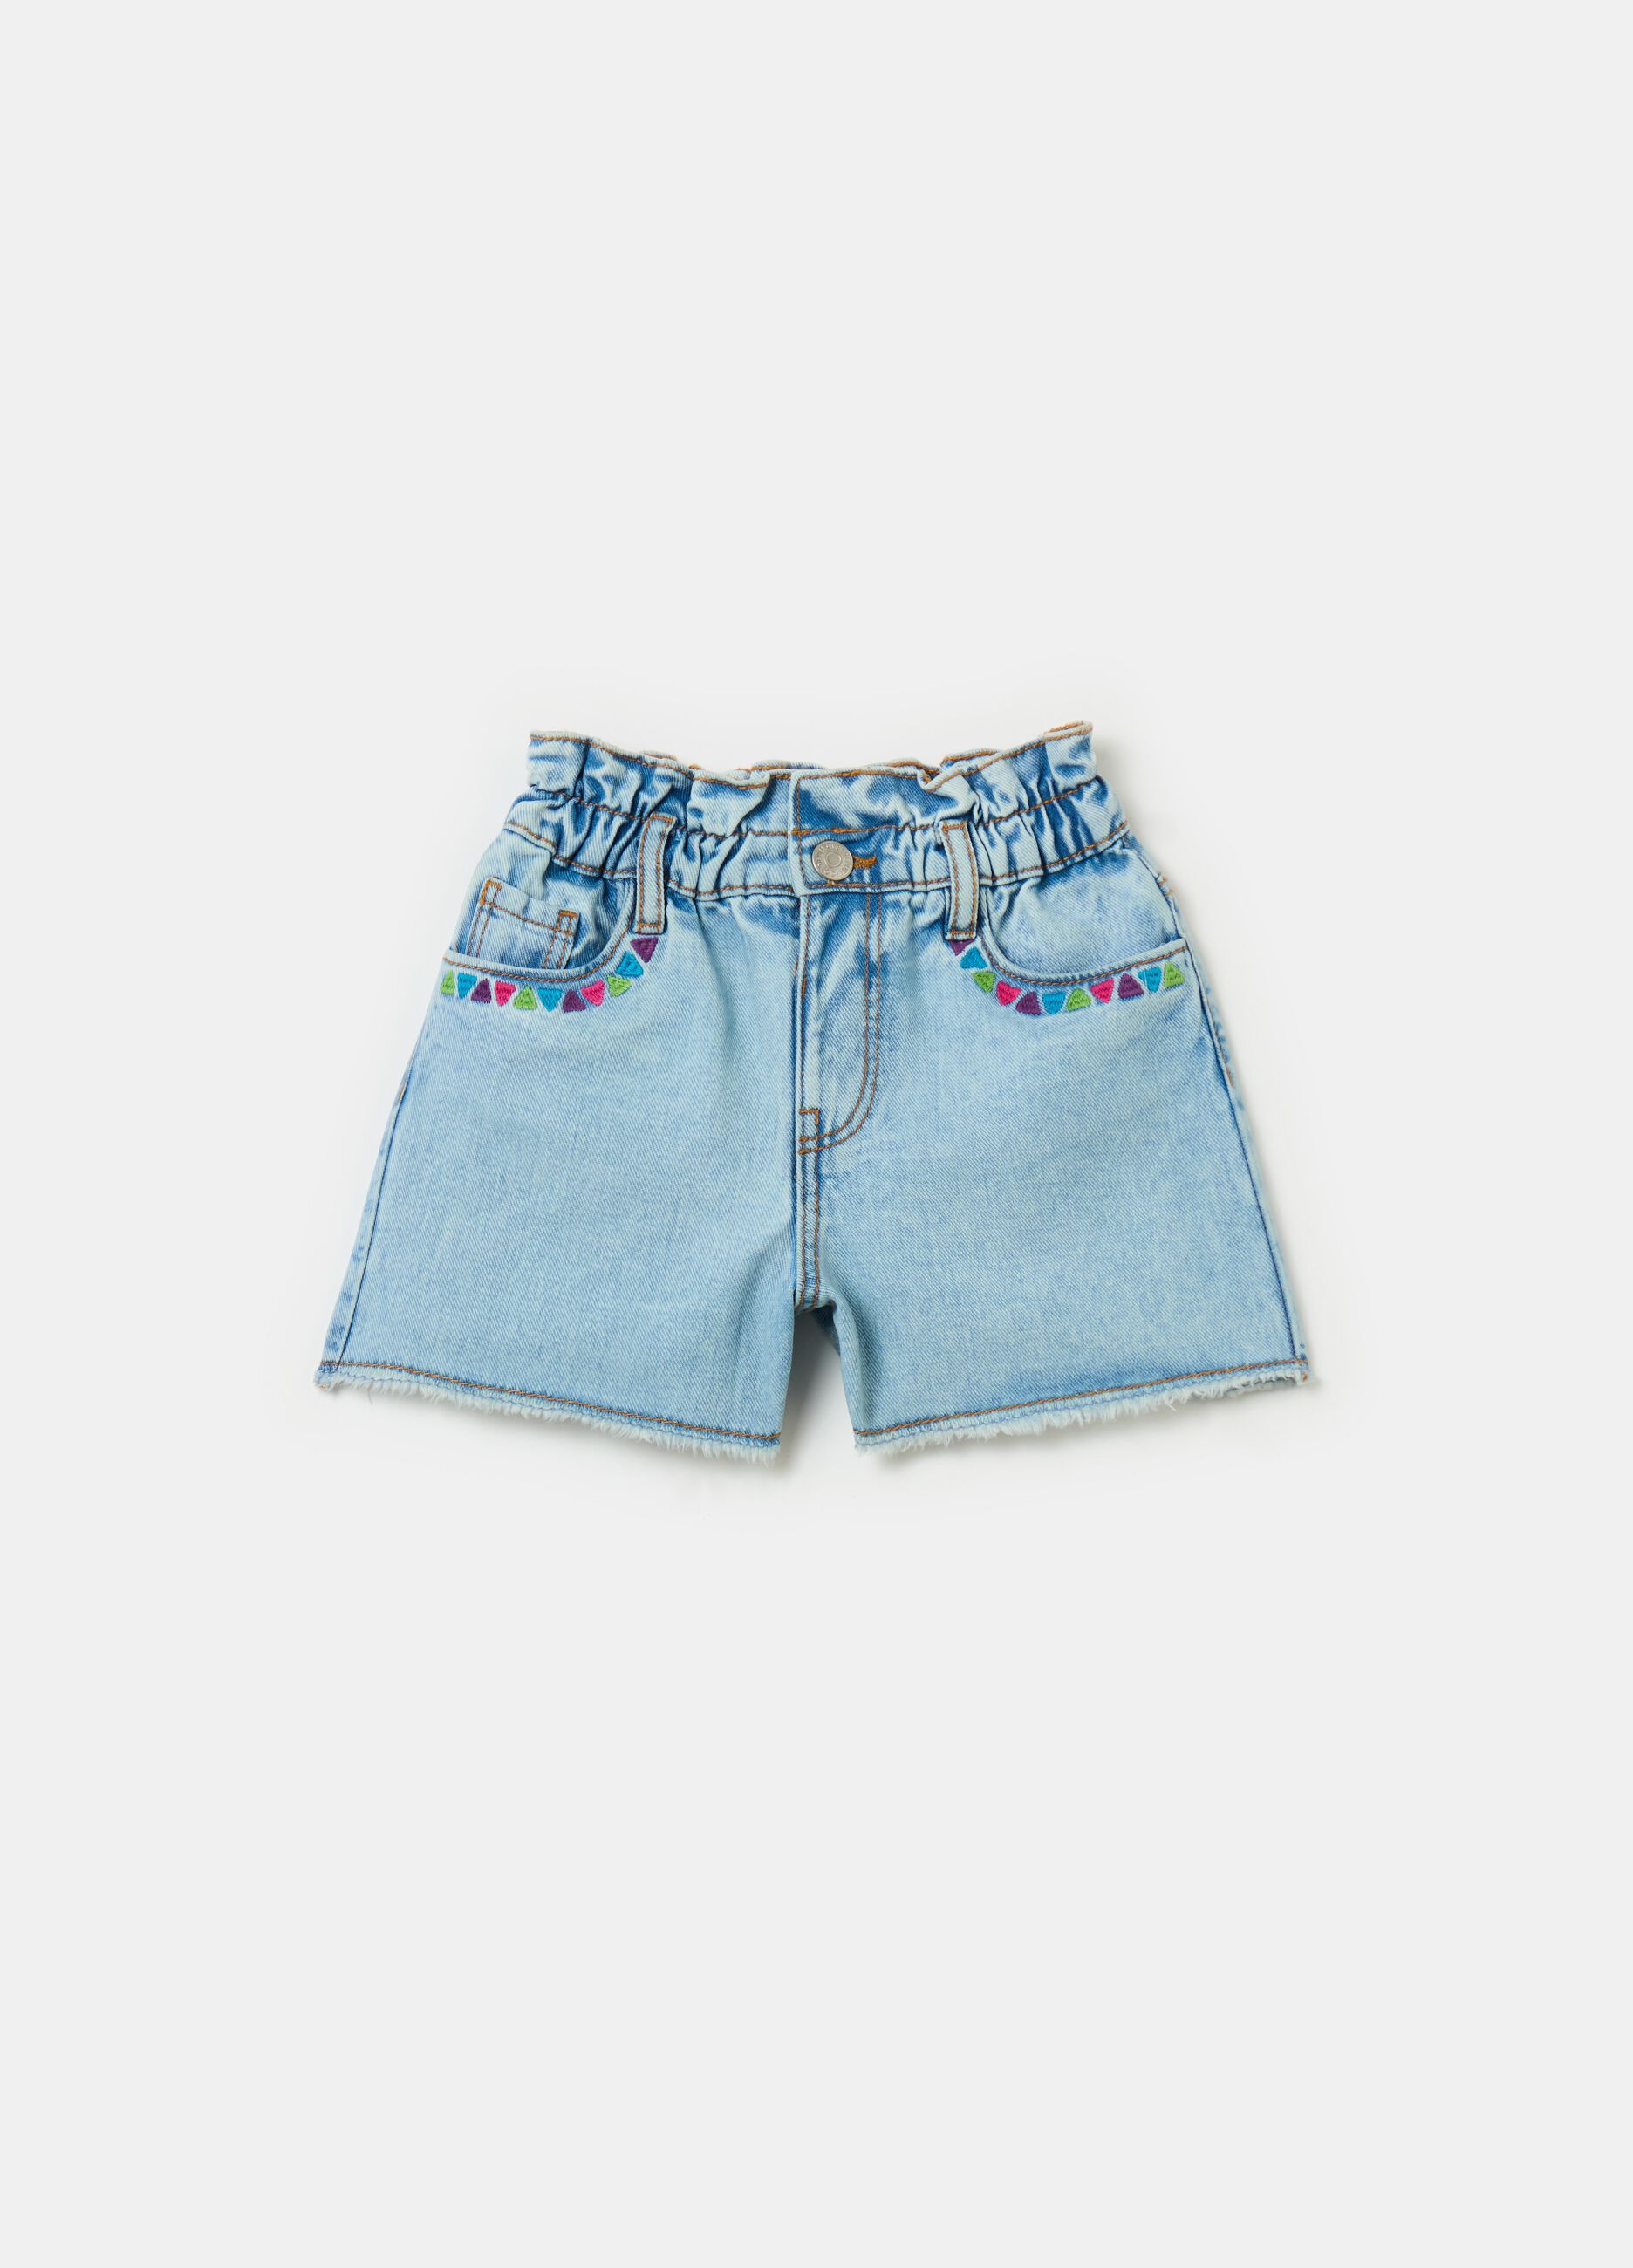 Paper bag shorts in denim with embroidery